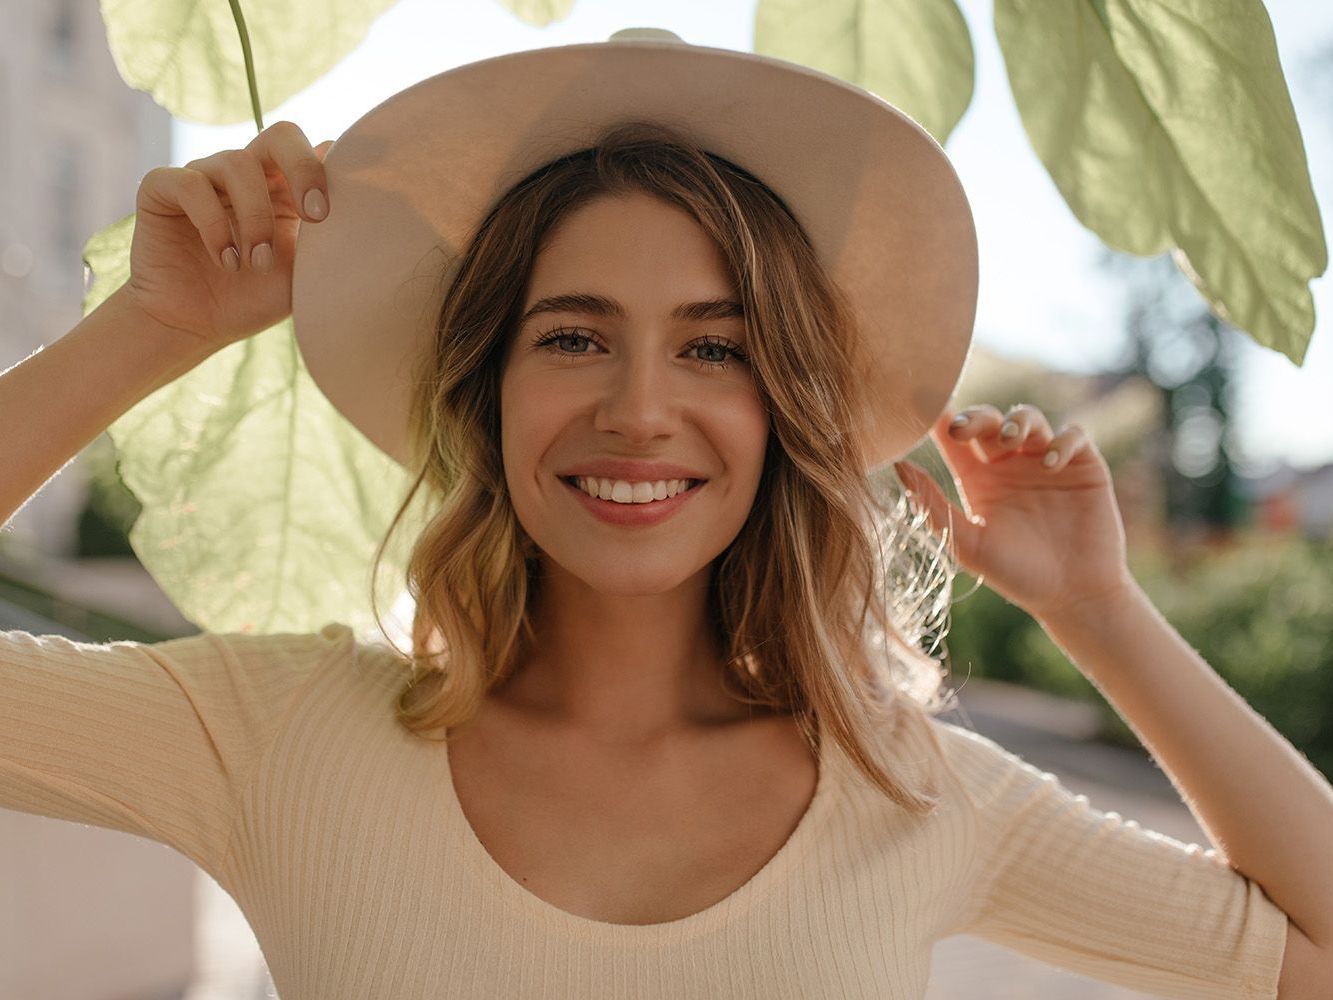 girl standing outside in the sun with a hat on and her arms up happy smiling